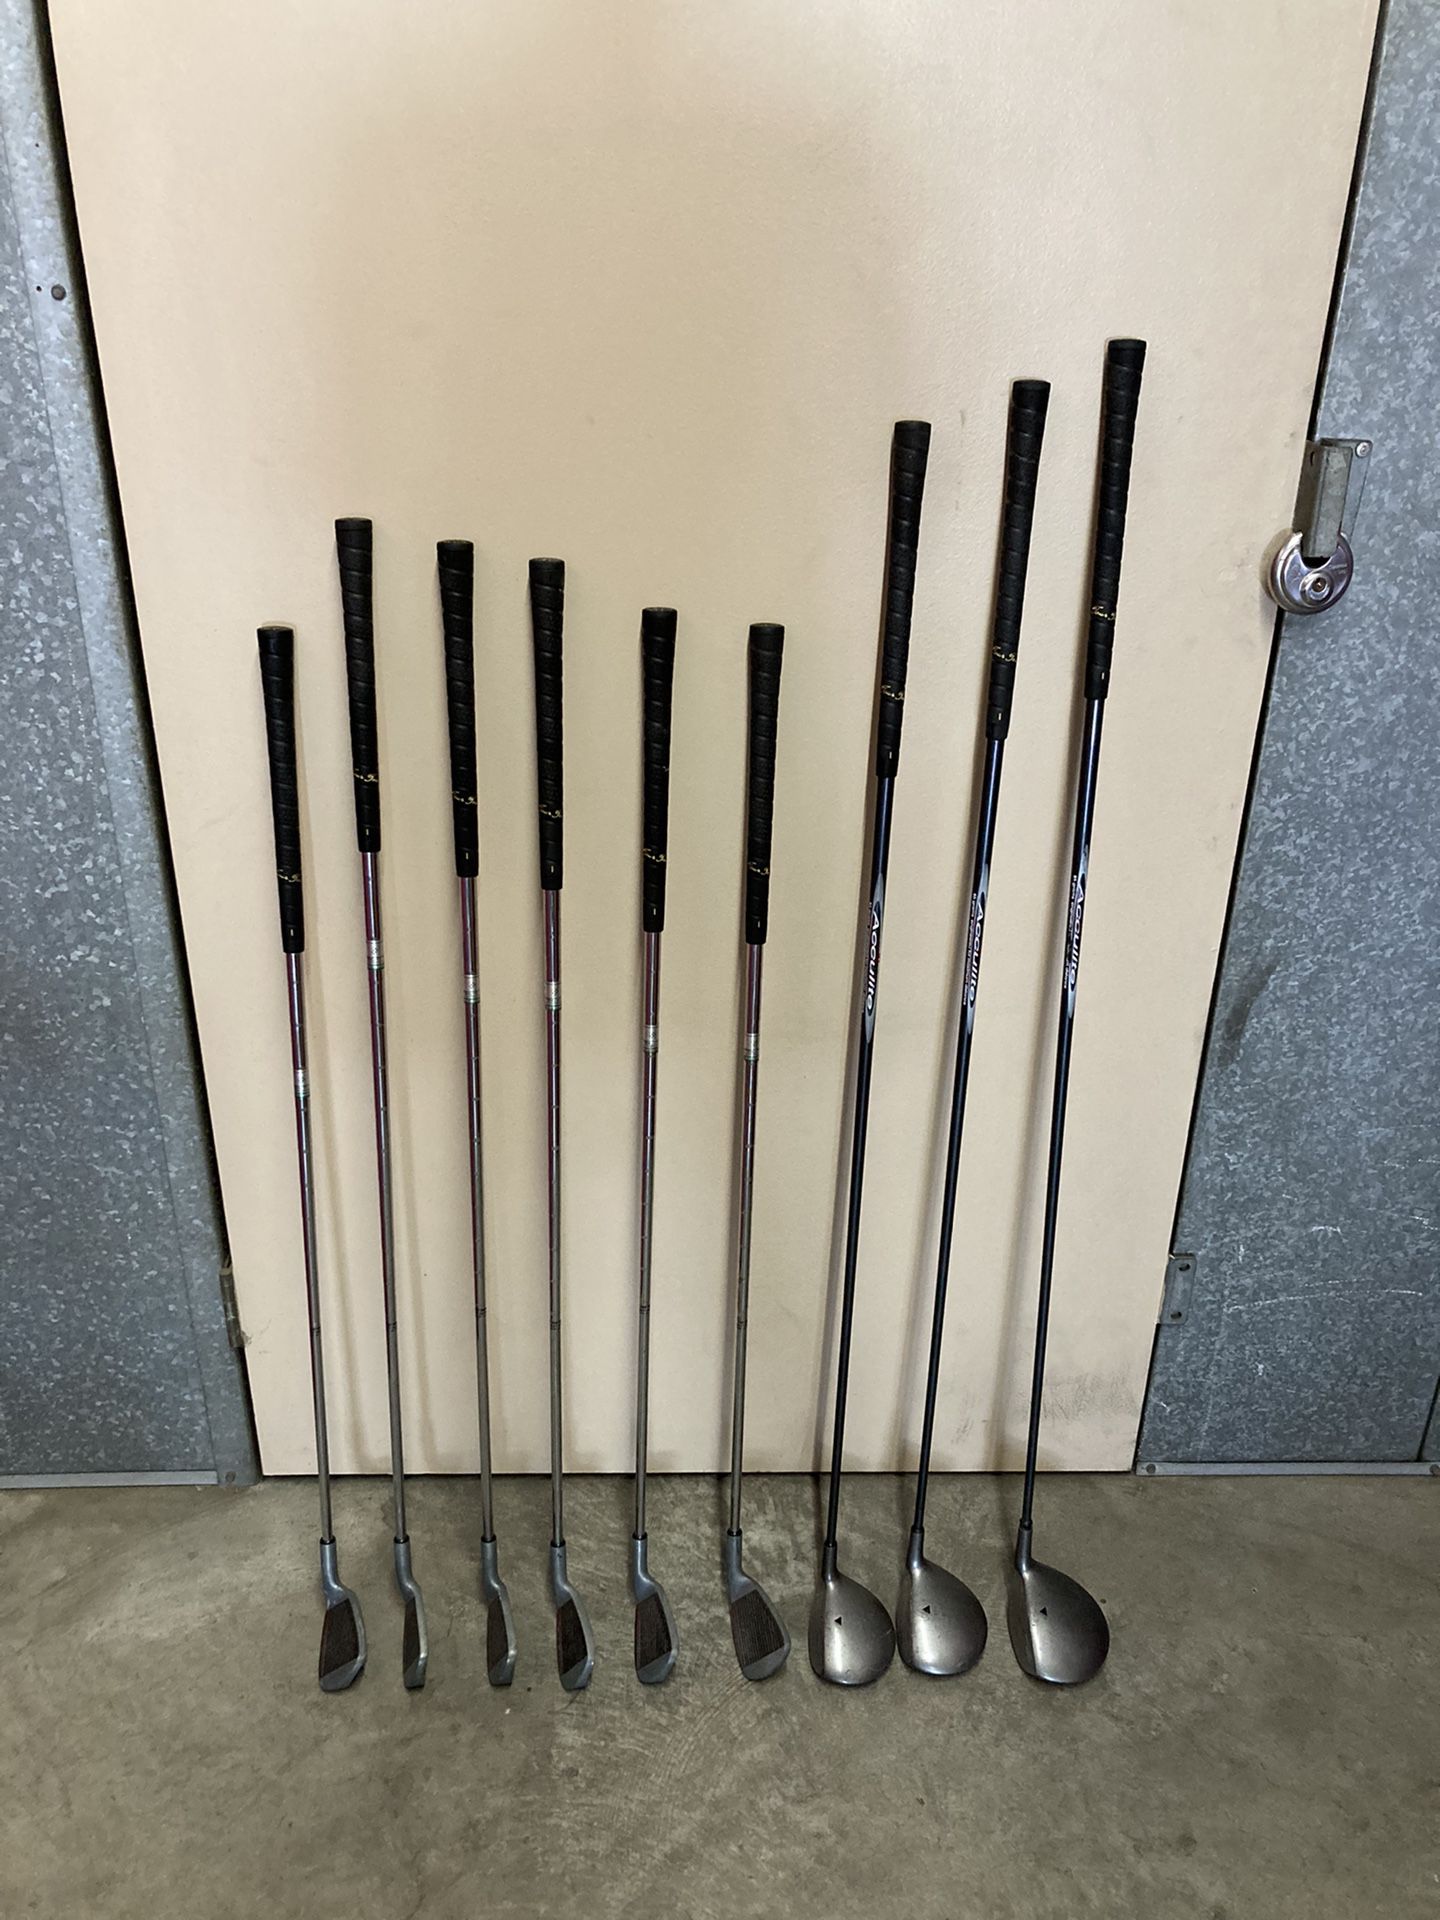 MEN'S LEFT HANDED GOLF CLUBS - PERFECT FOR A BEGINNER!